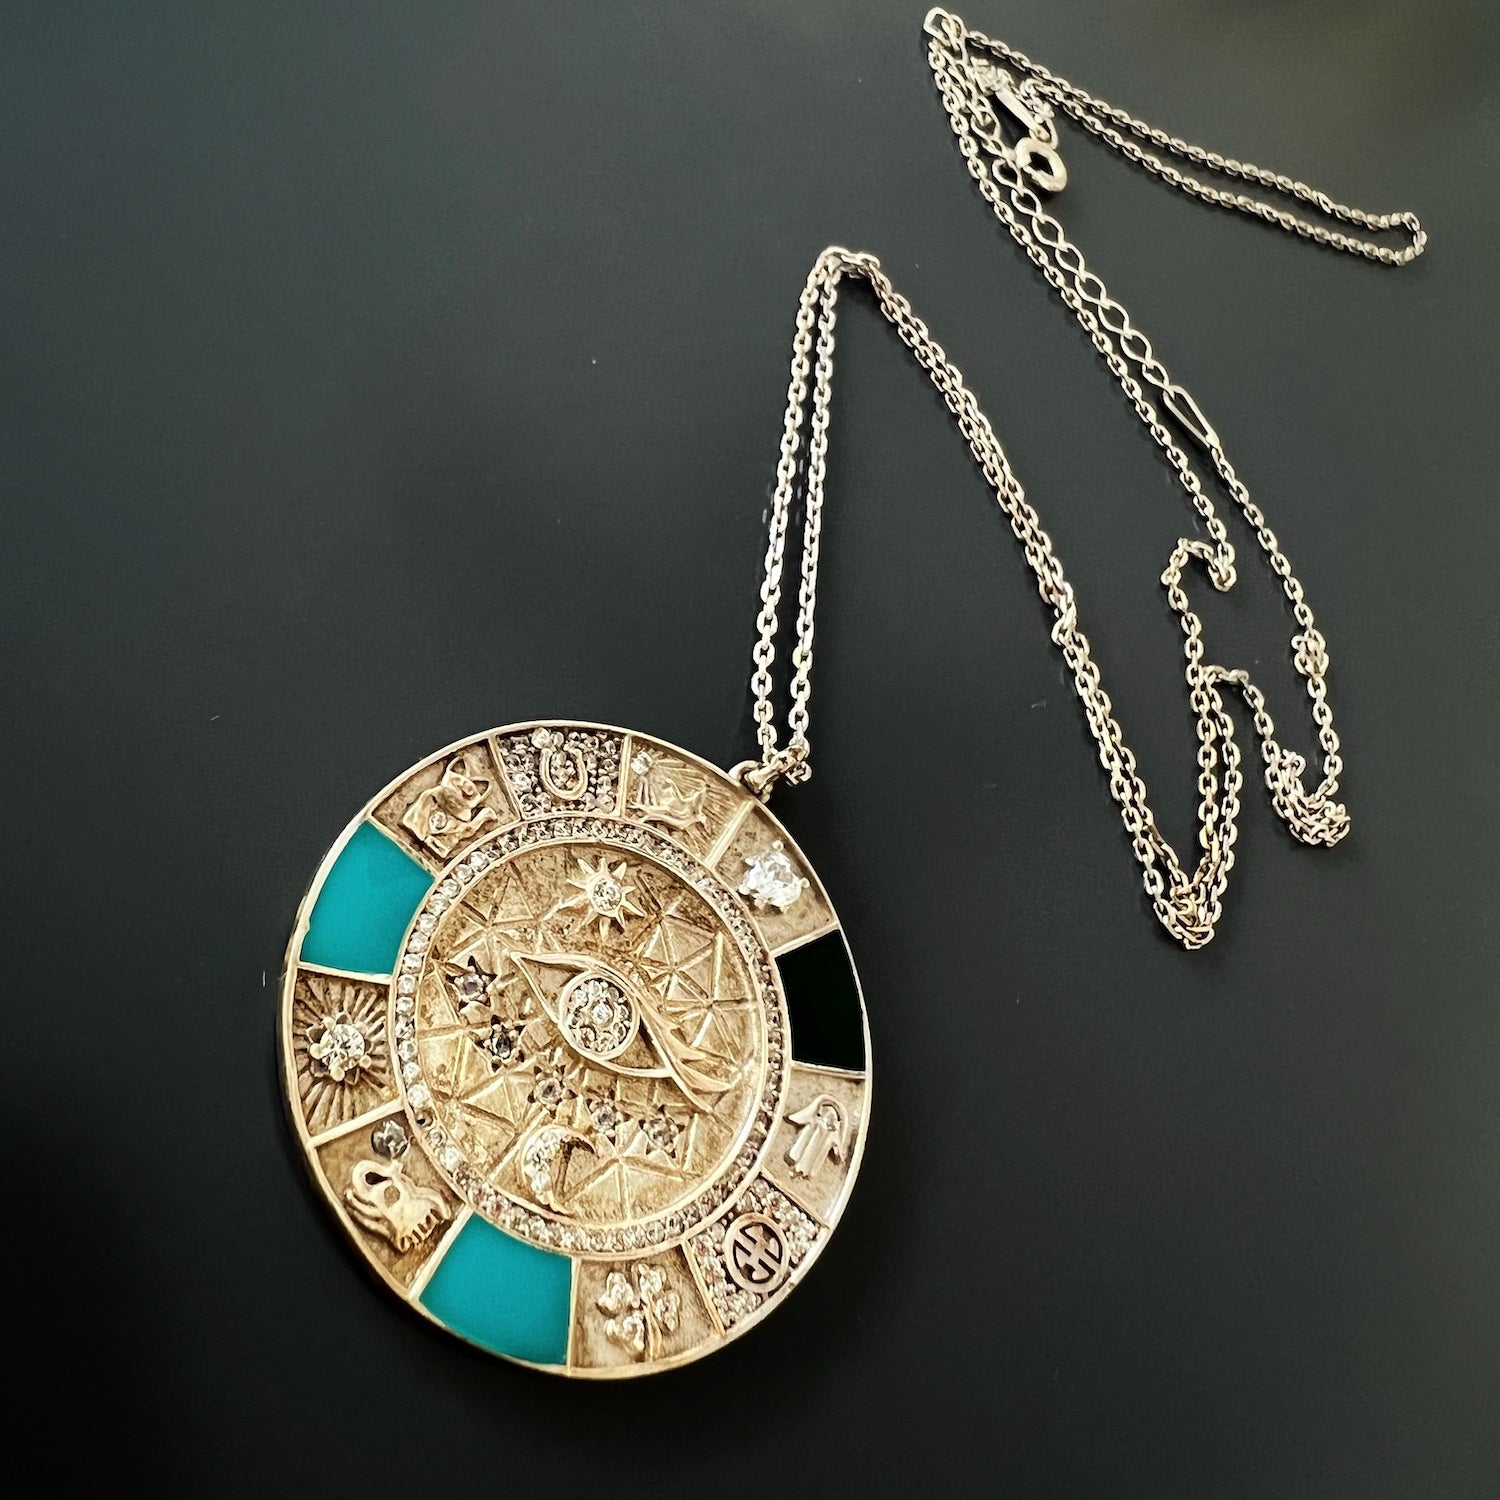 The Magic Blessings Necklace: A symbol of luck and protection, beautifully handcrafted with sterling silver, blue enamel, and sparkling zircon stones.